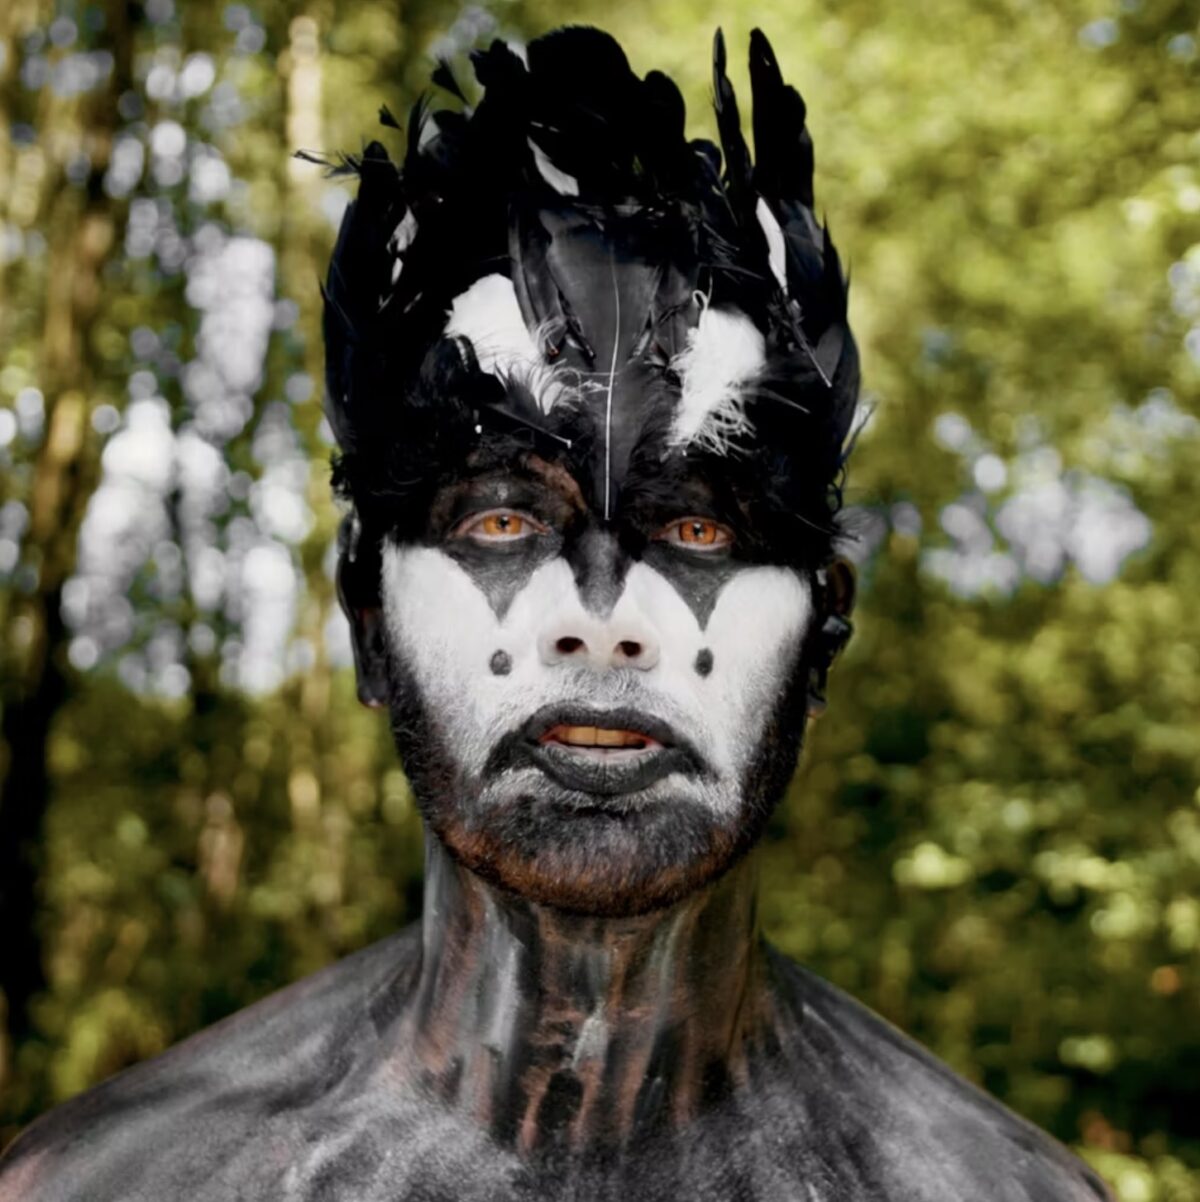 Dramatic close-up photo of a man wearing clown-like magpie make-up.